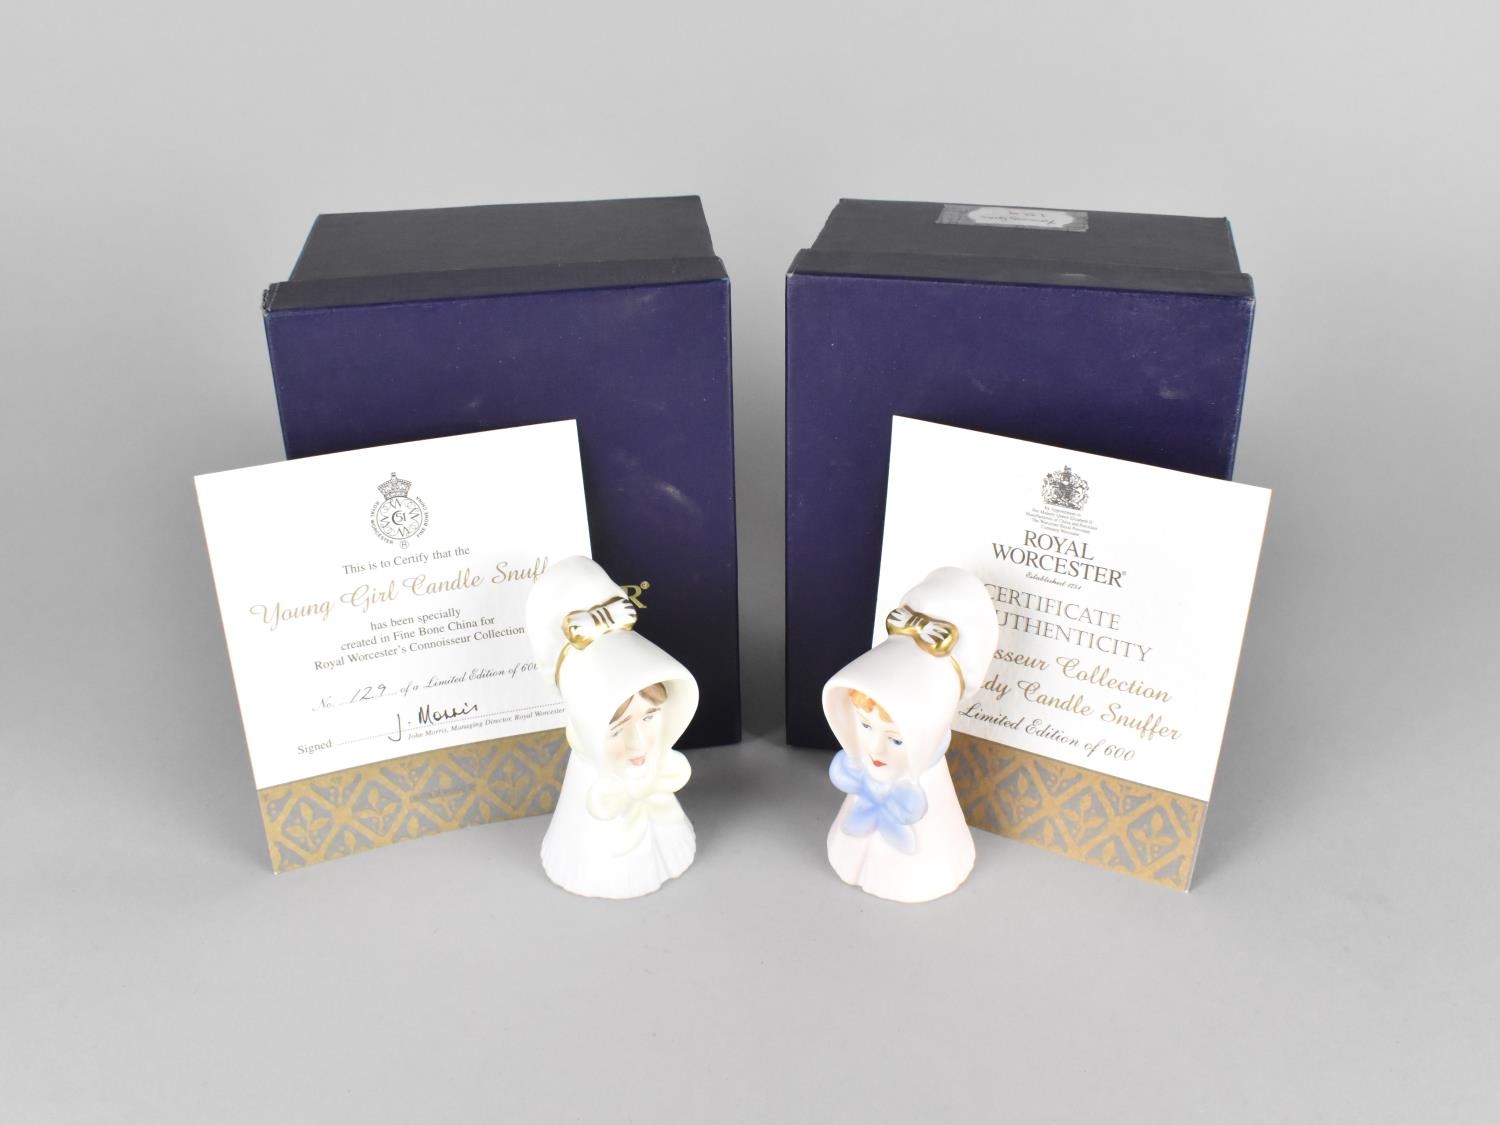 Two Royal Worcester Limited Edition Candle Snuffers - Image 2 of 2